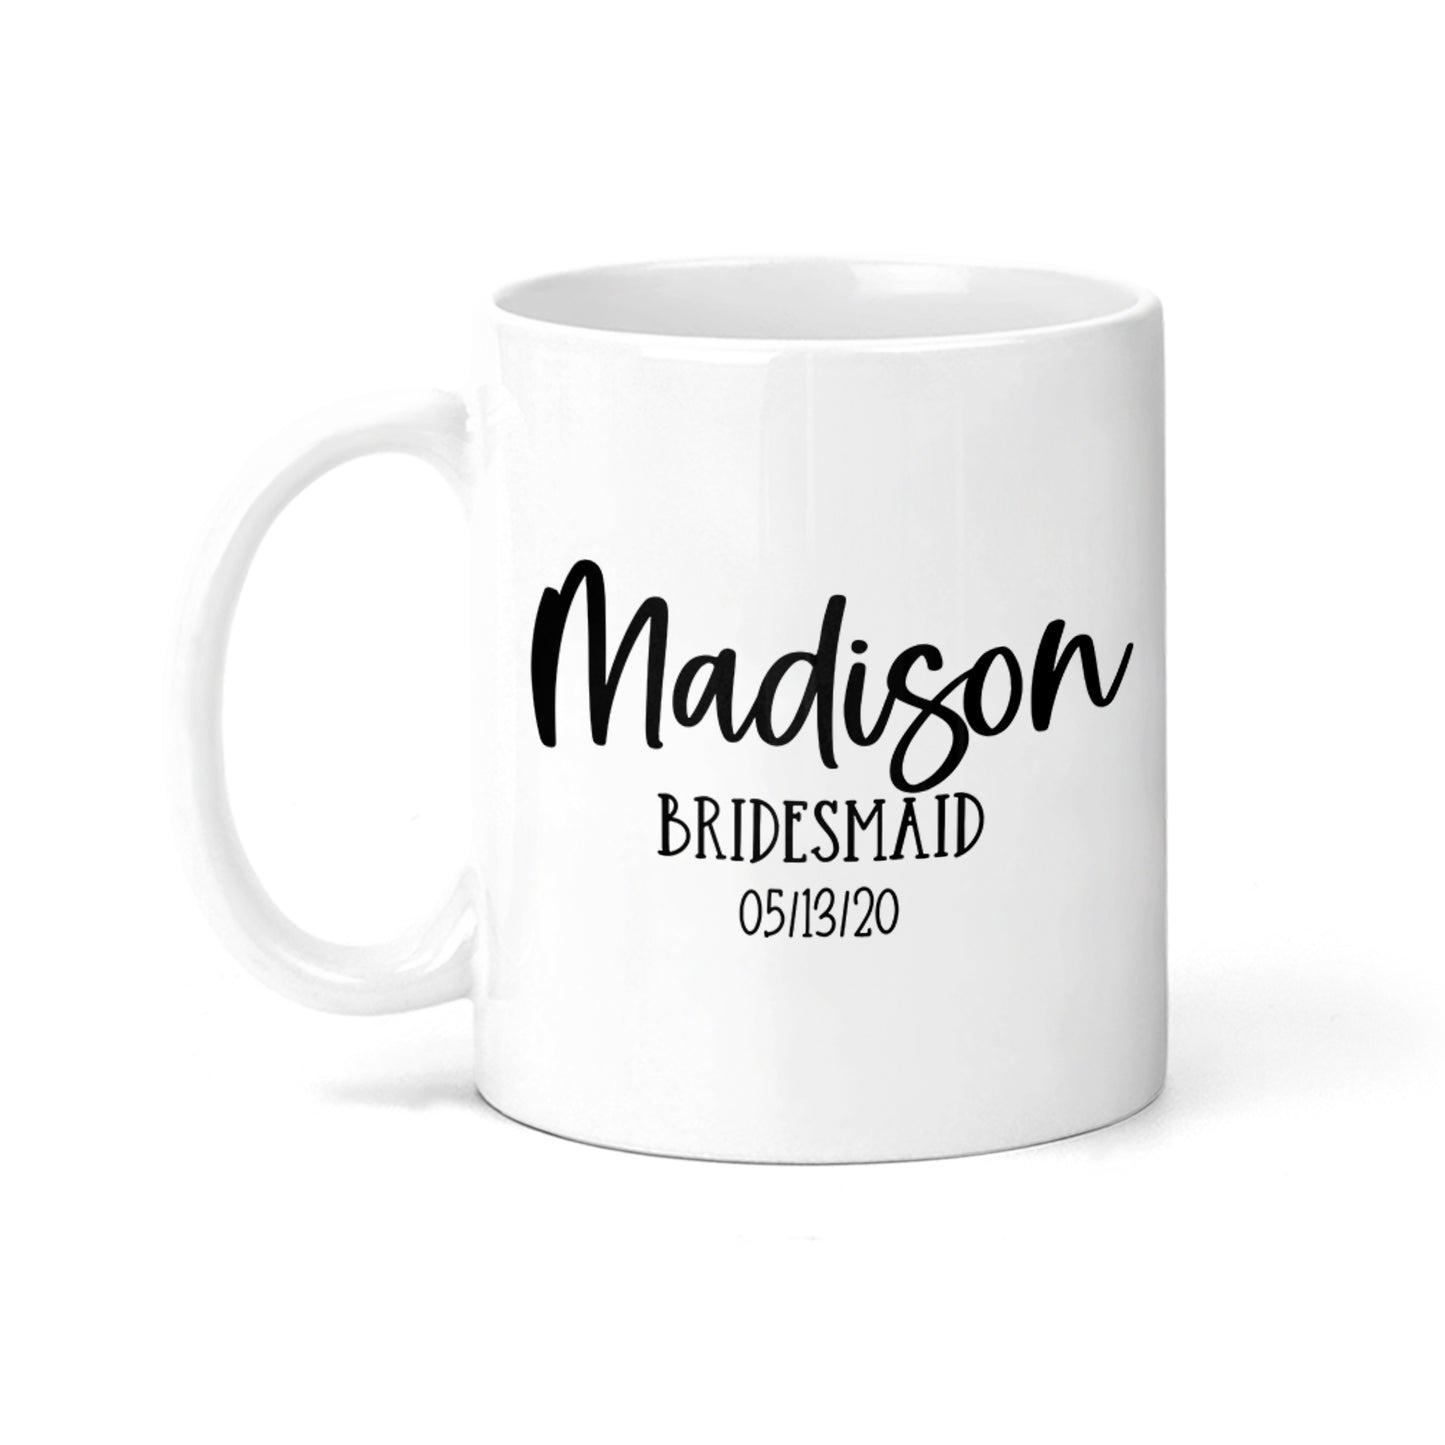 Personalized Bridesmaid with Date Coffee Mug - M0535